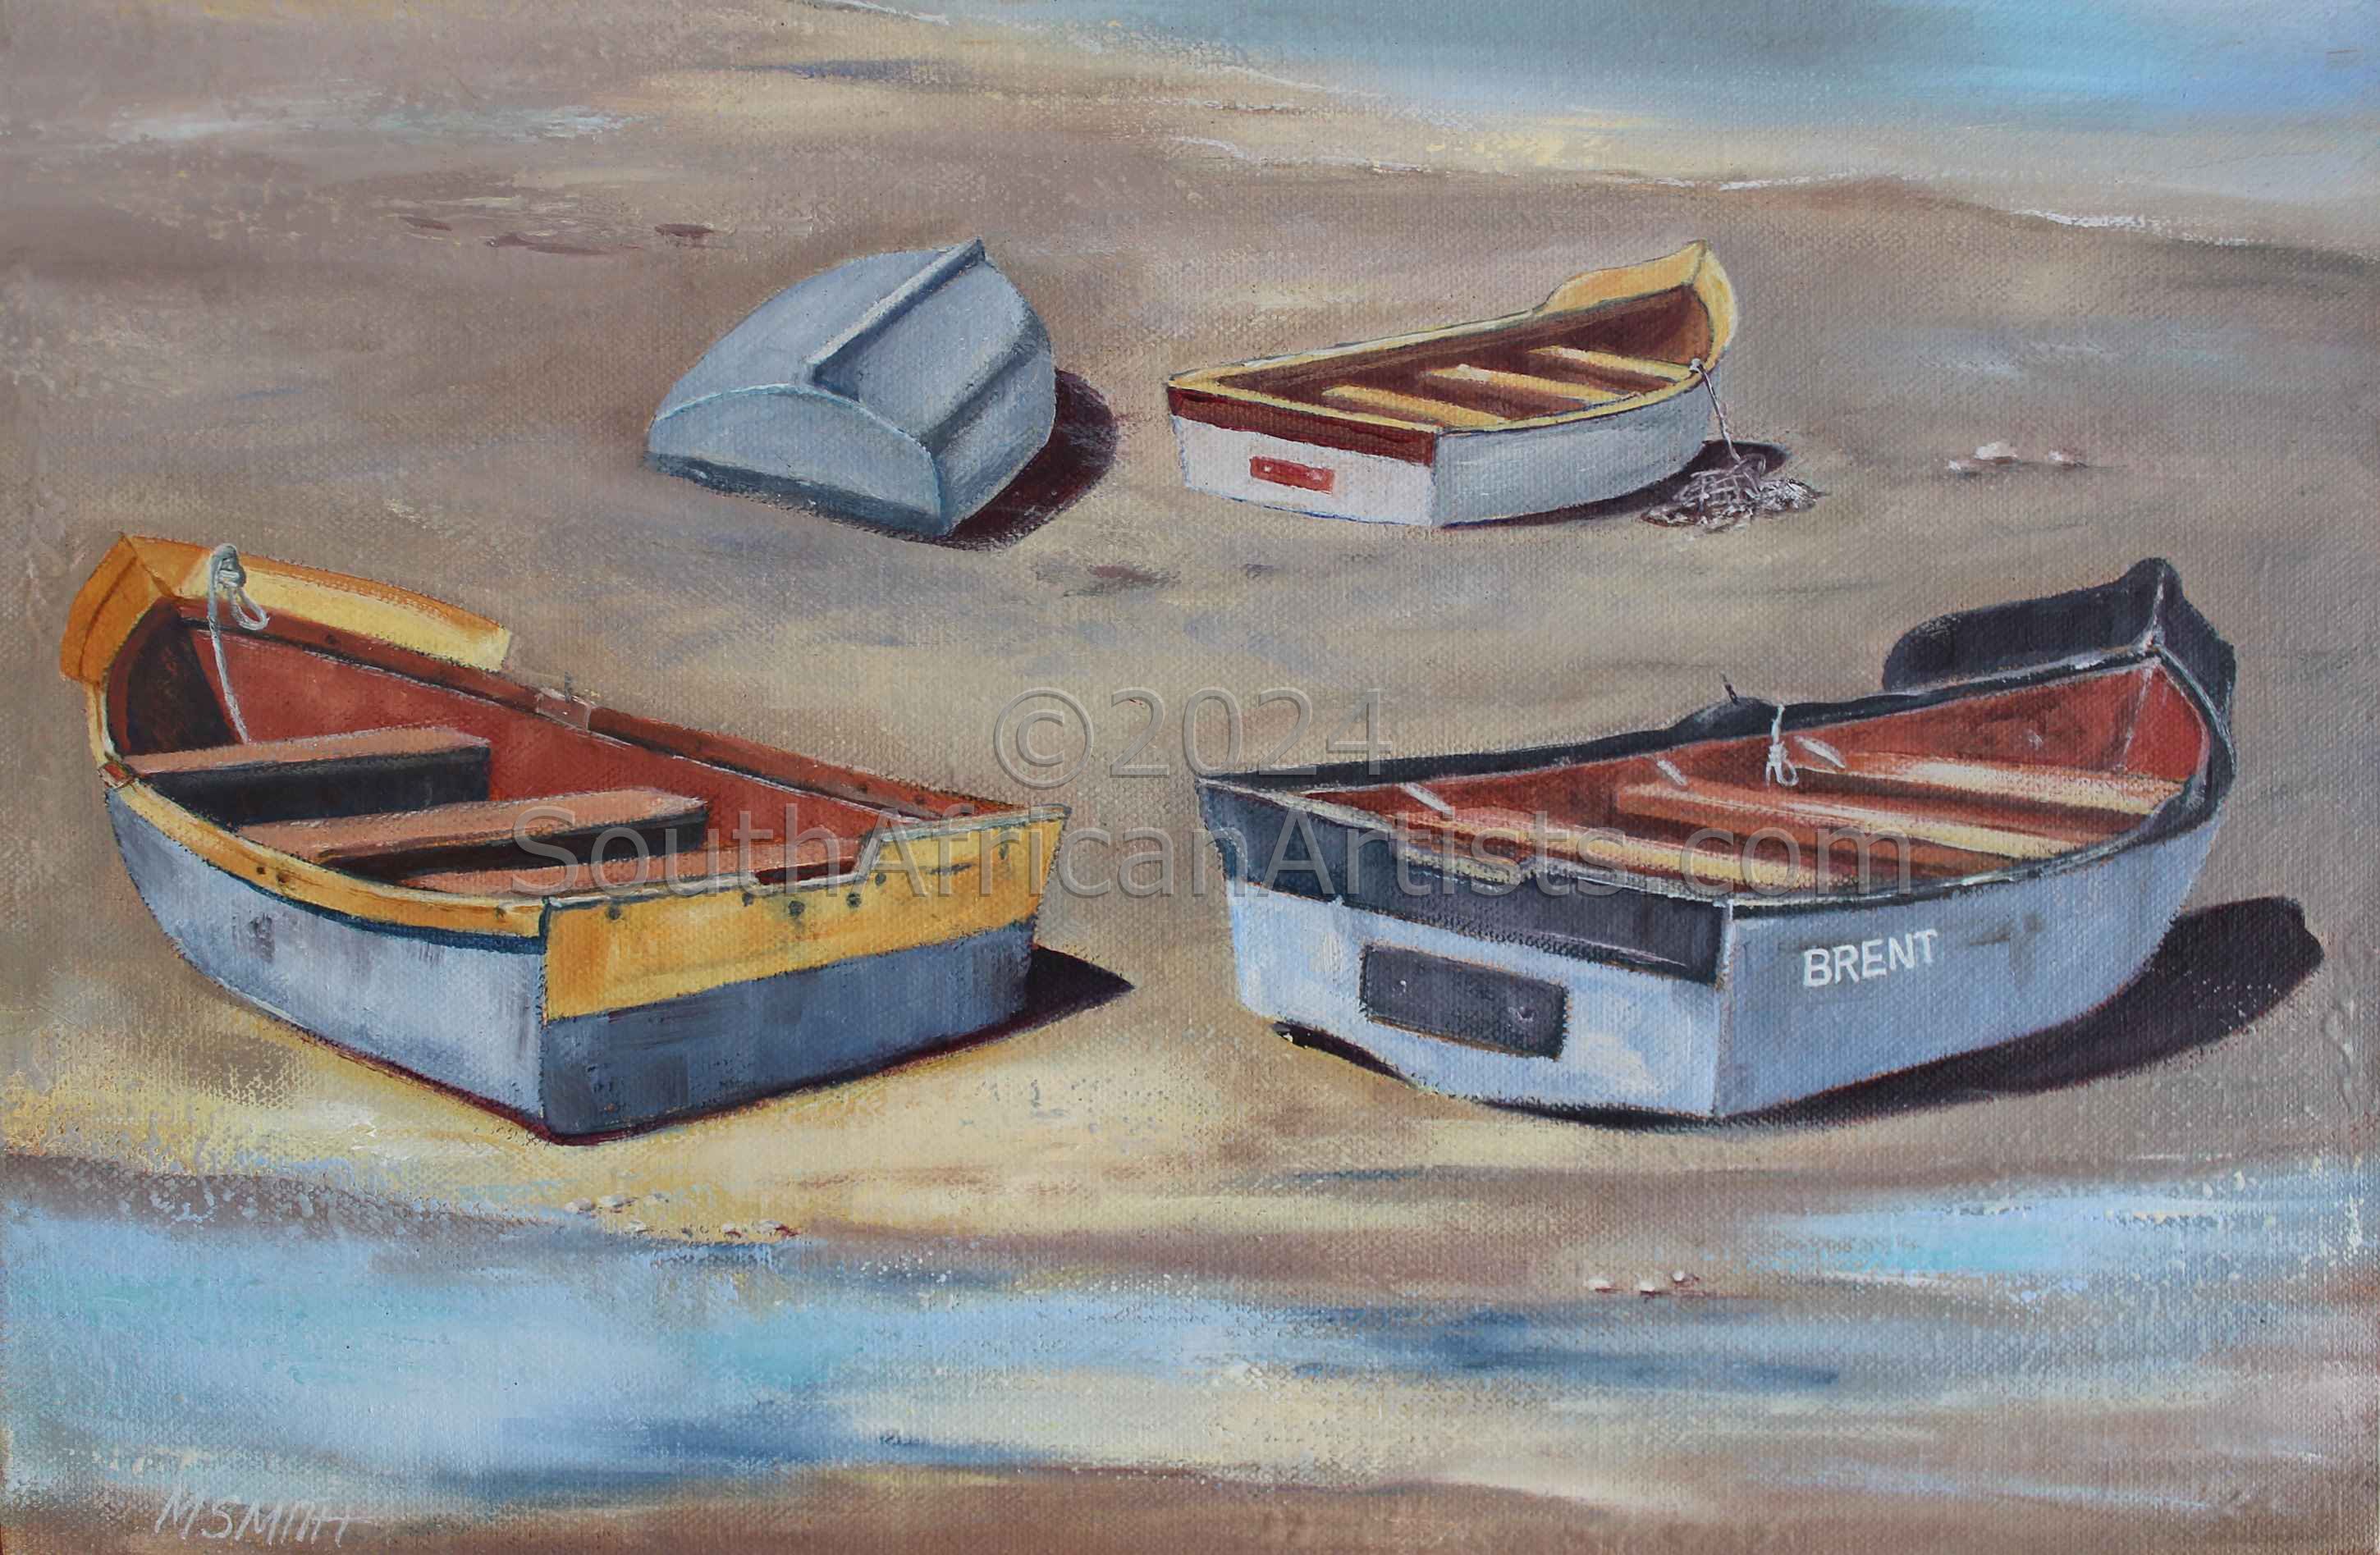  'Brent' Boats 2